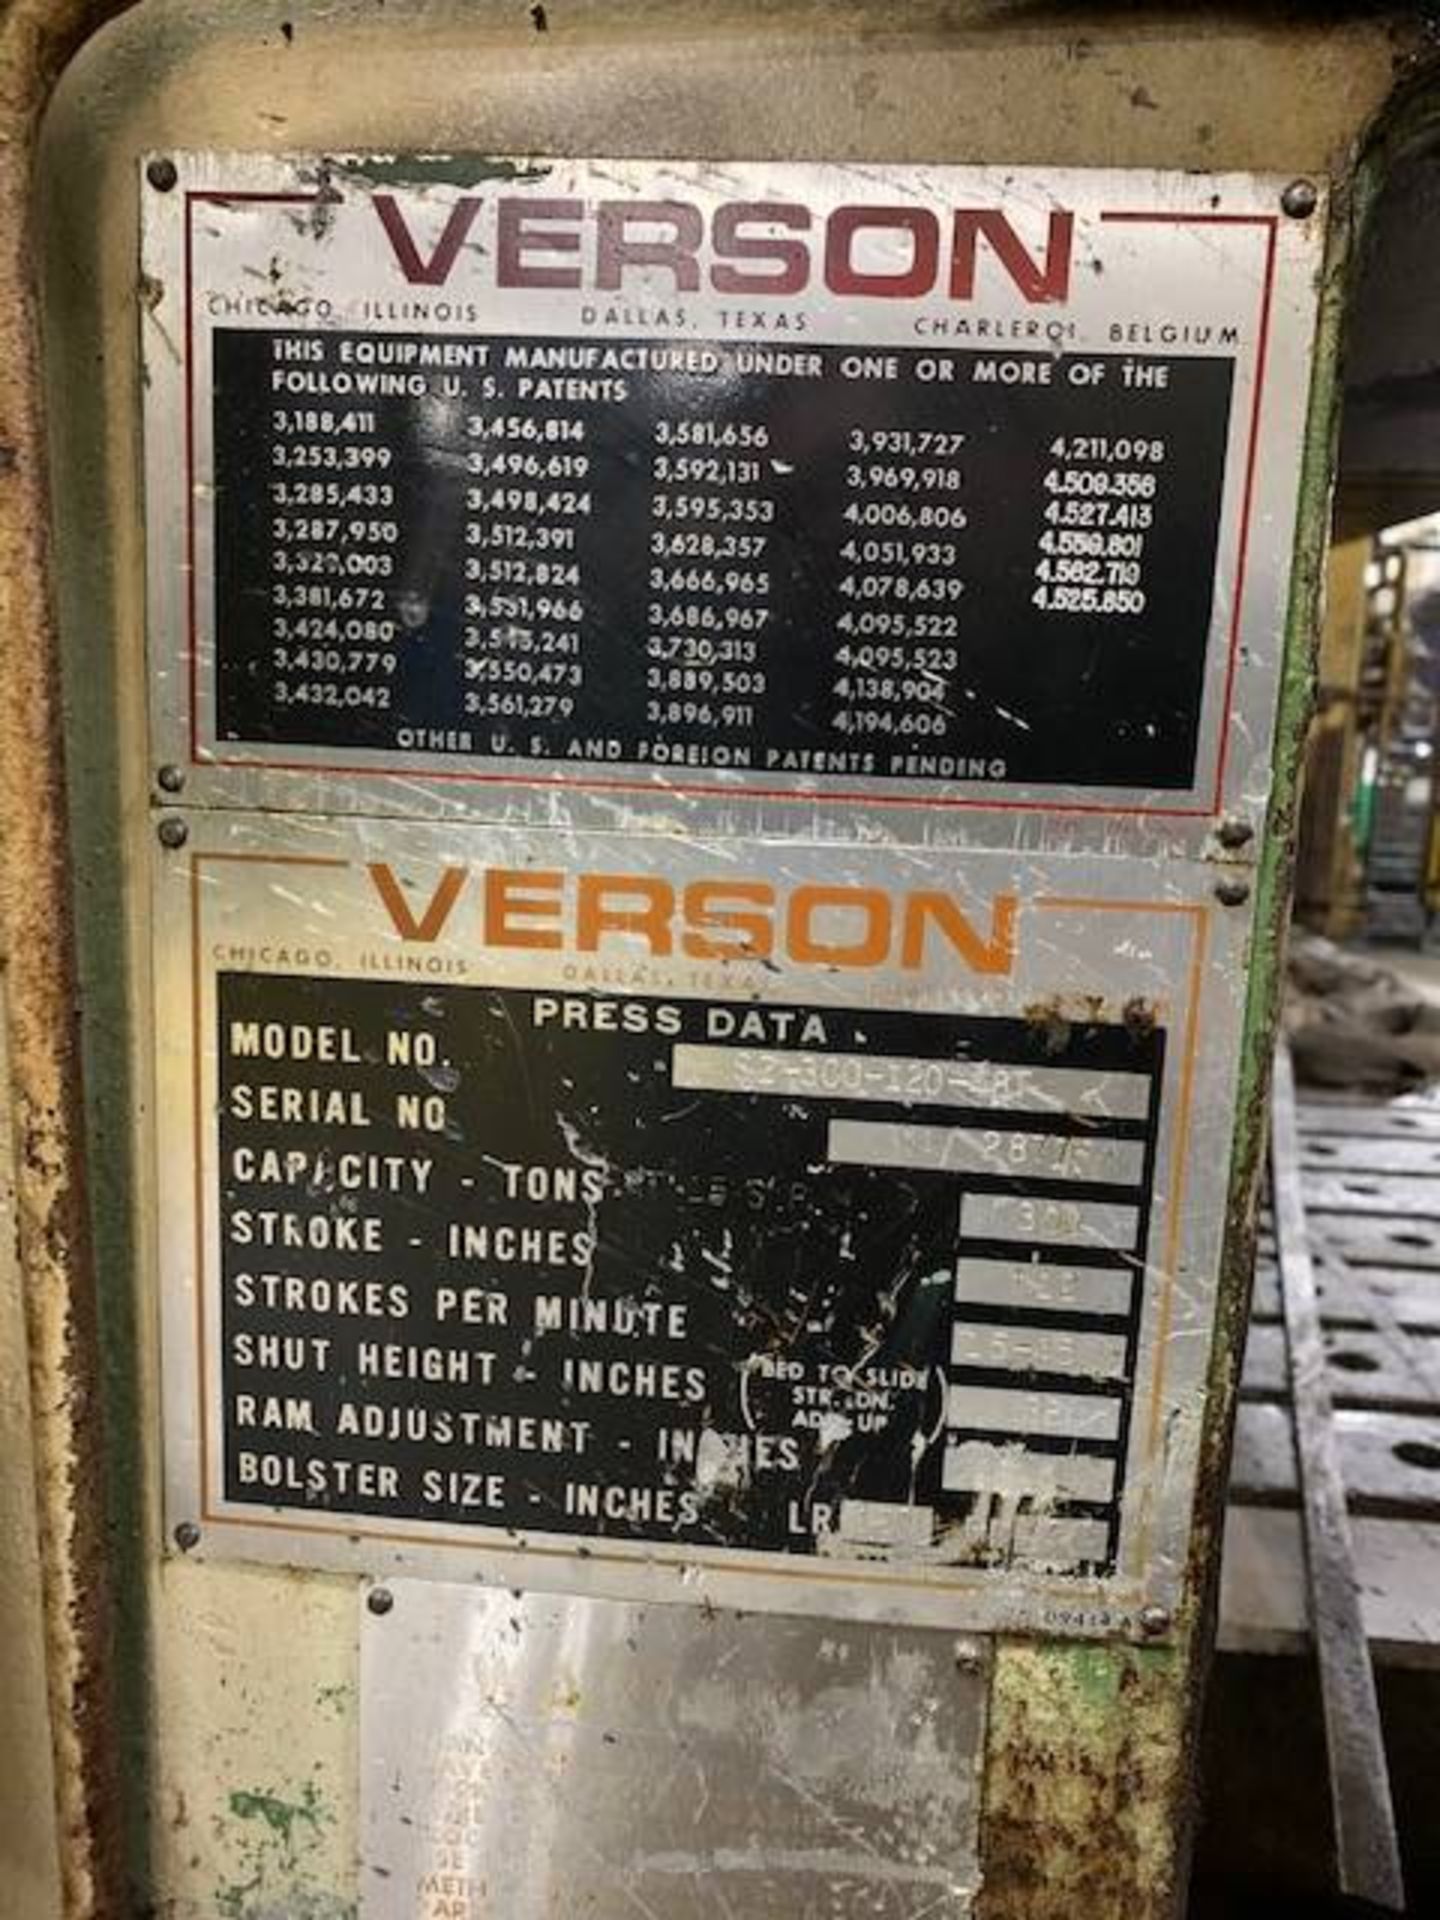 Verson S2-300-120-48T 300 Ton Straight Side Double Crank Press - Image 5 of 7